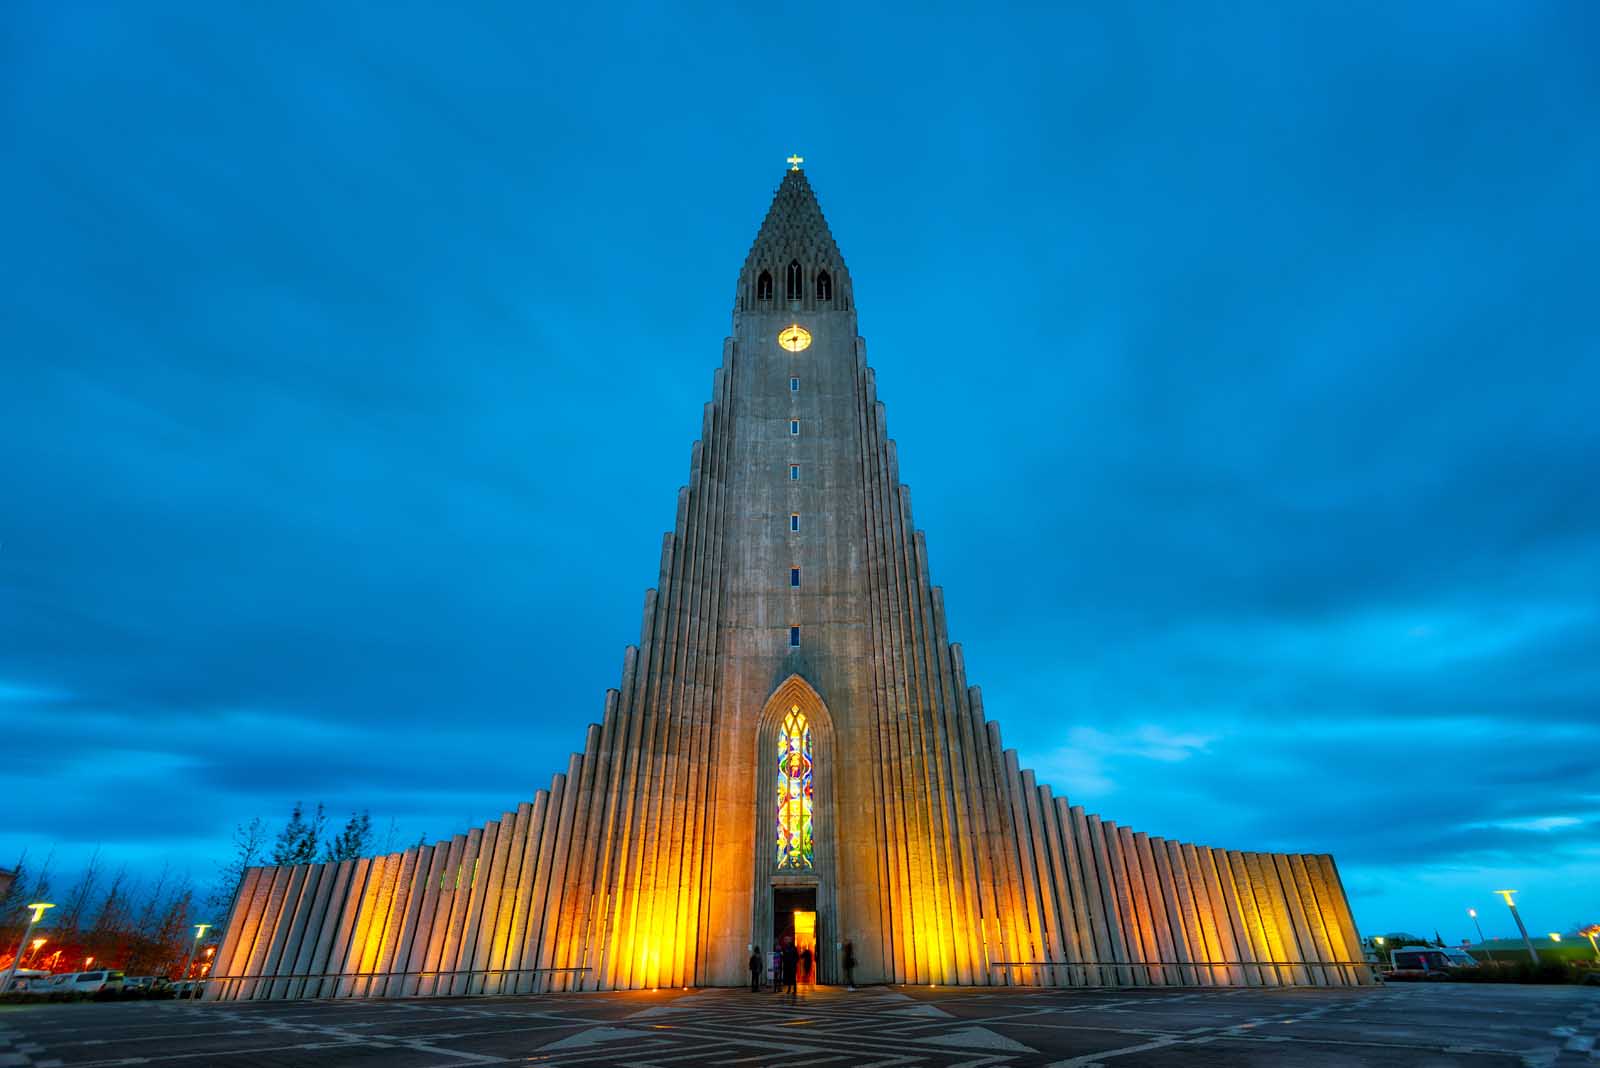 Top things to do in Reykjavik Iceland